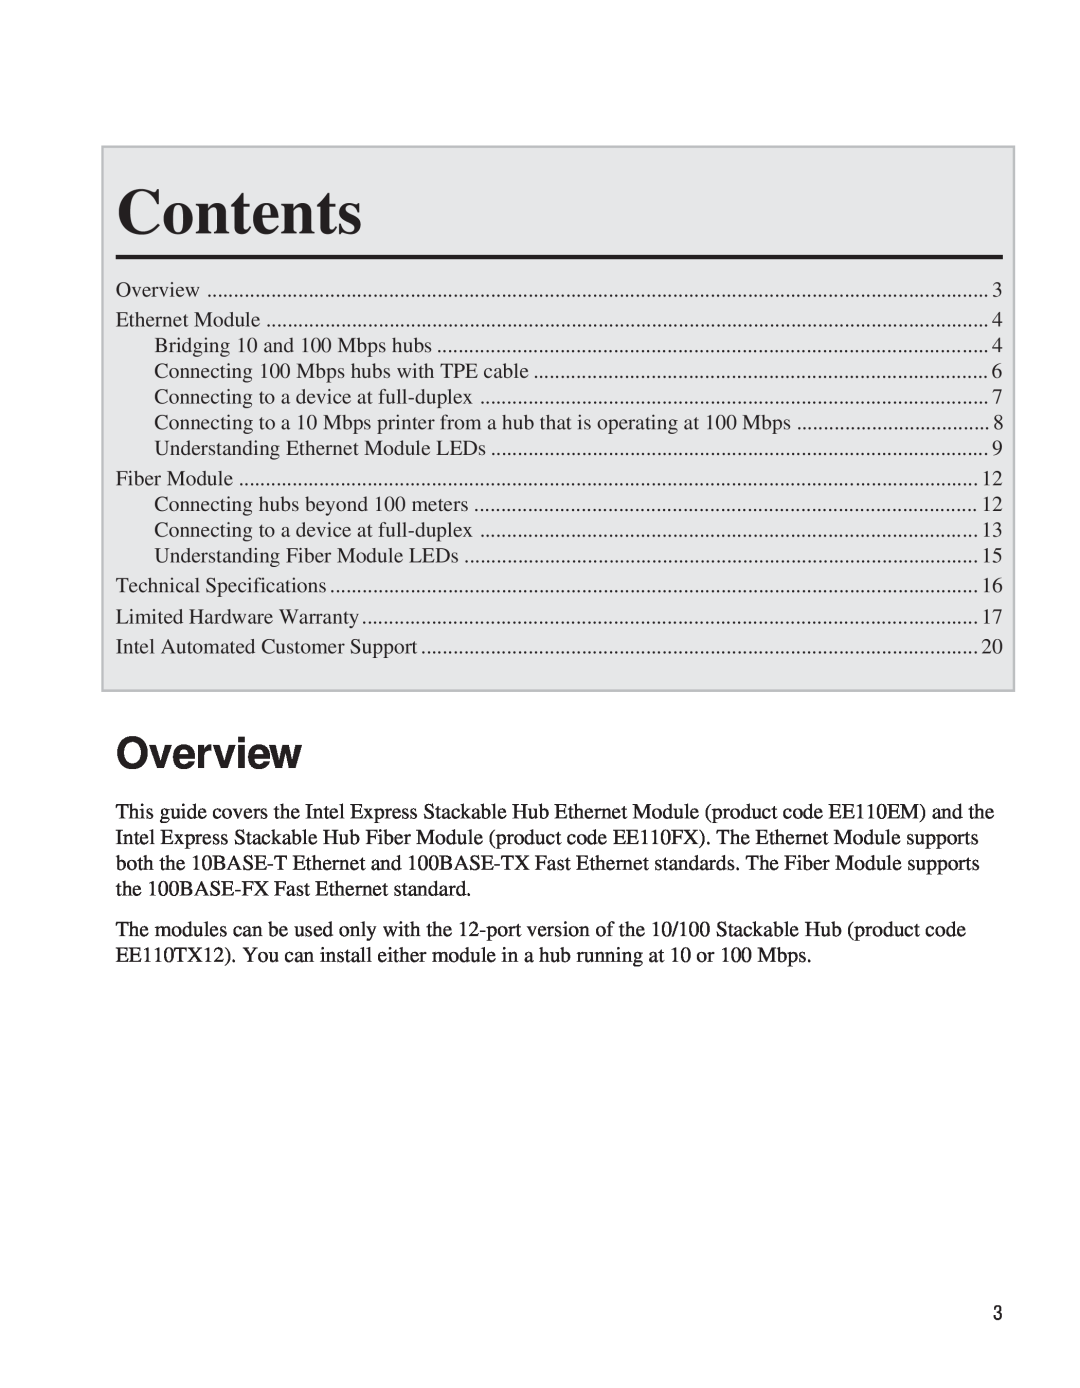 Intel EE110EM manual Contents, Overview 